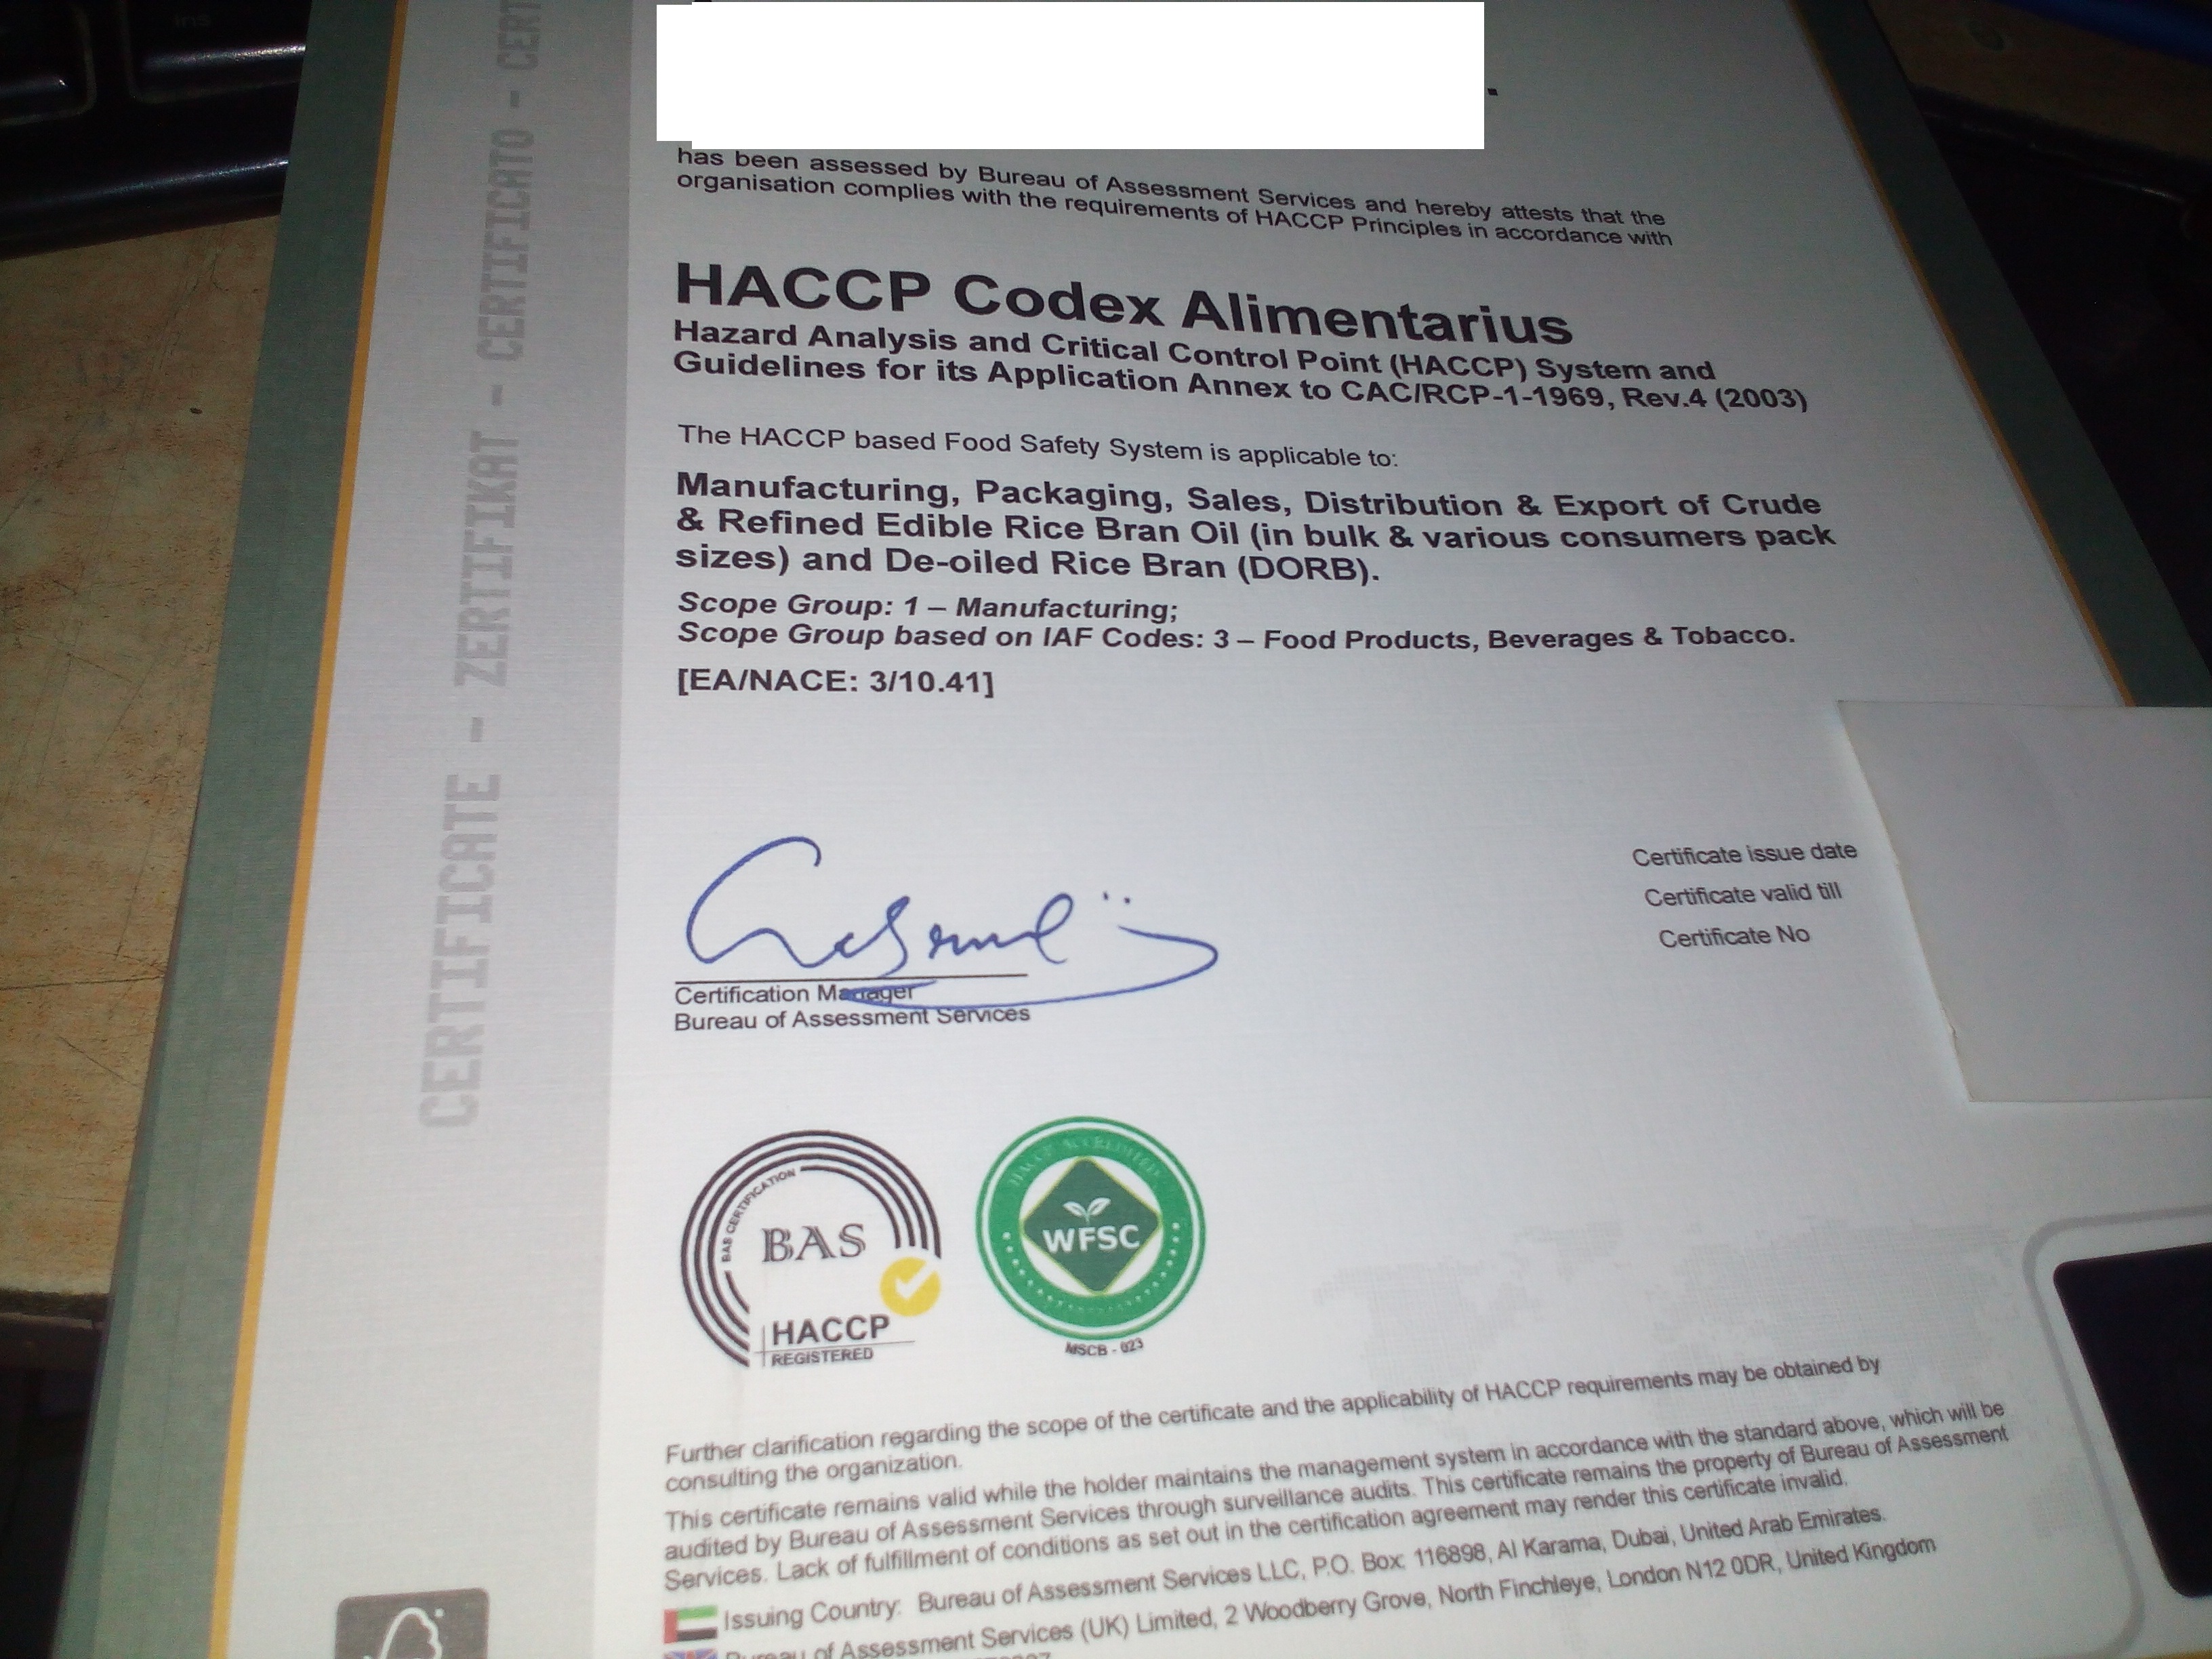 Food Safety Certificate